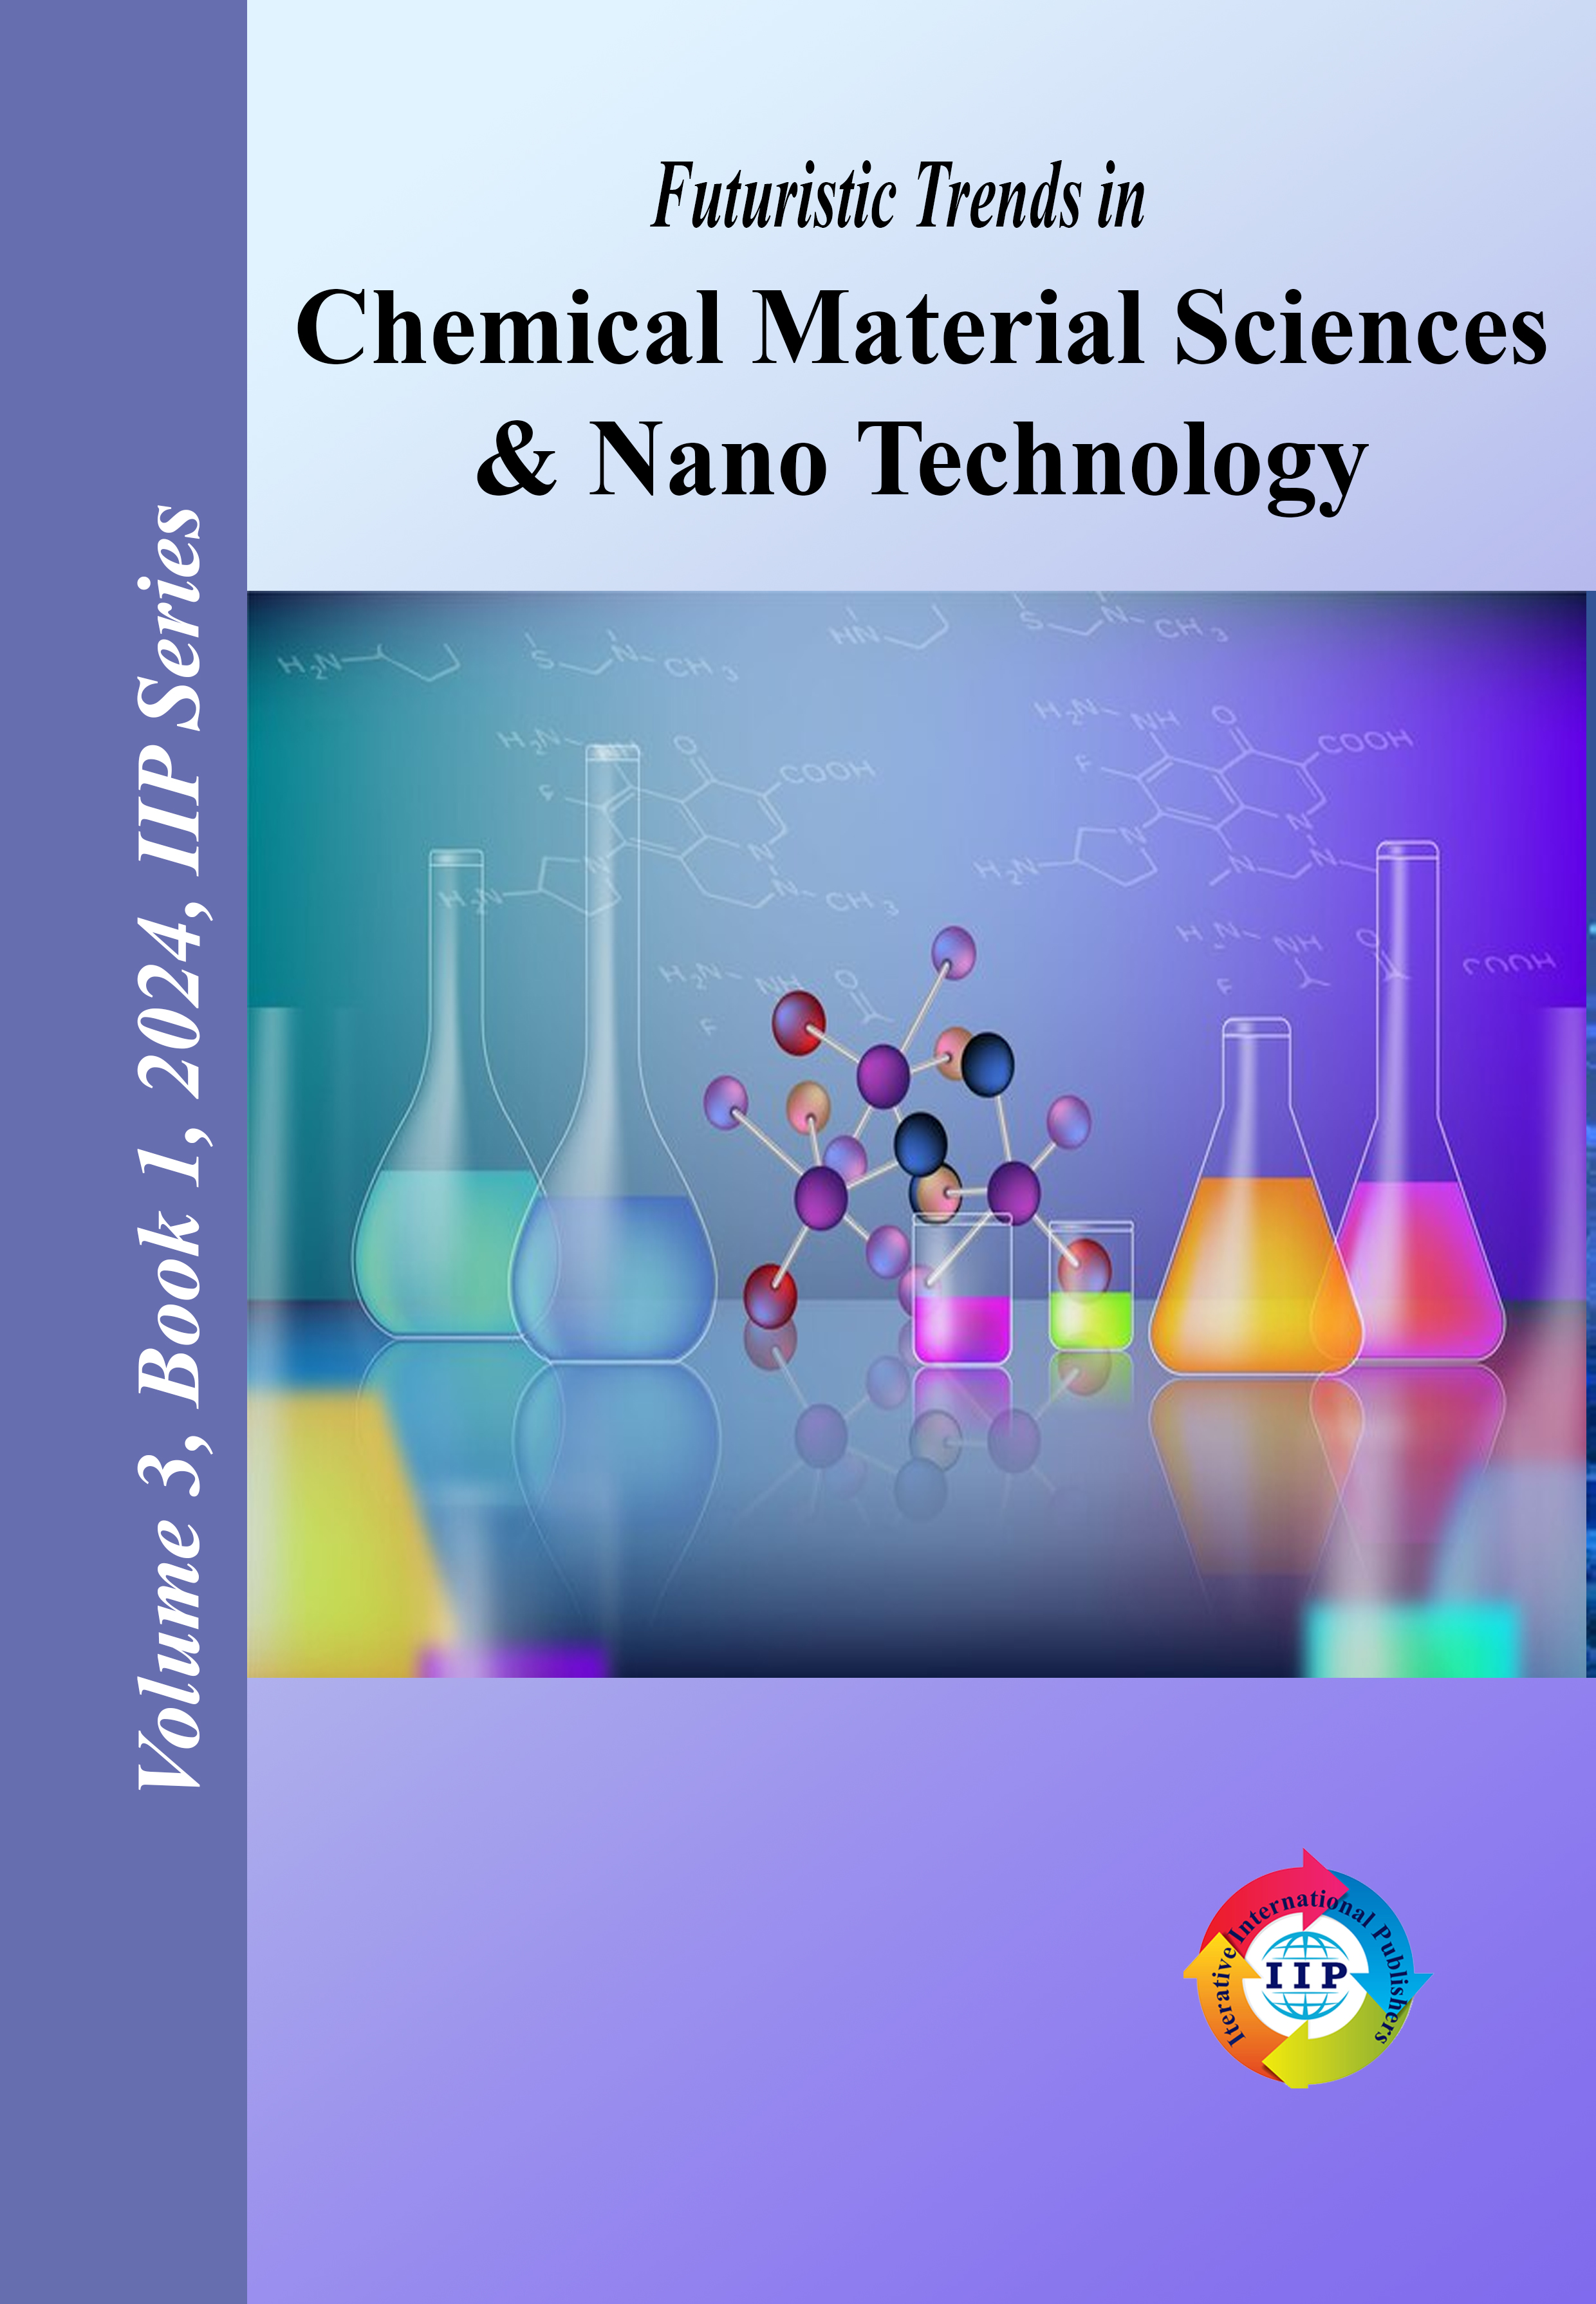 Futuristic Trends in Chemical Material Sciences & Nano Technology  Volume 3 Book 1